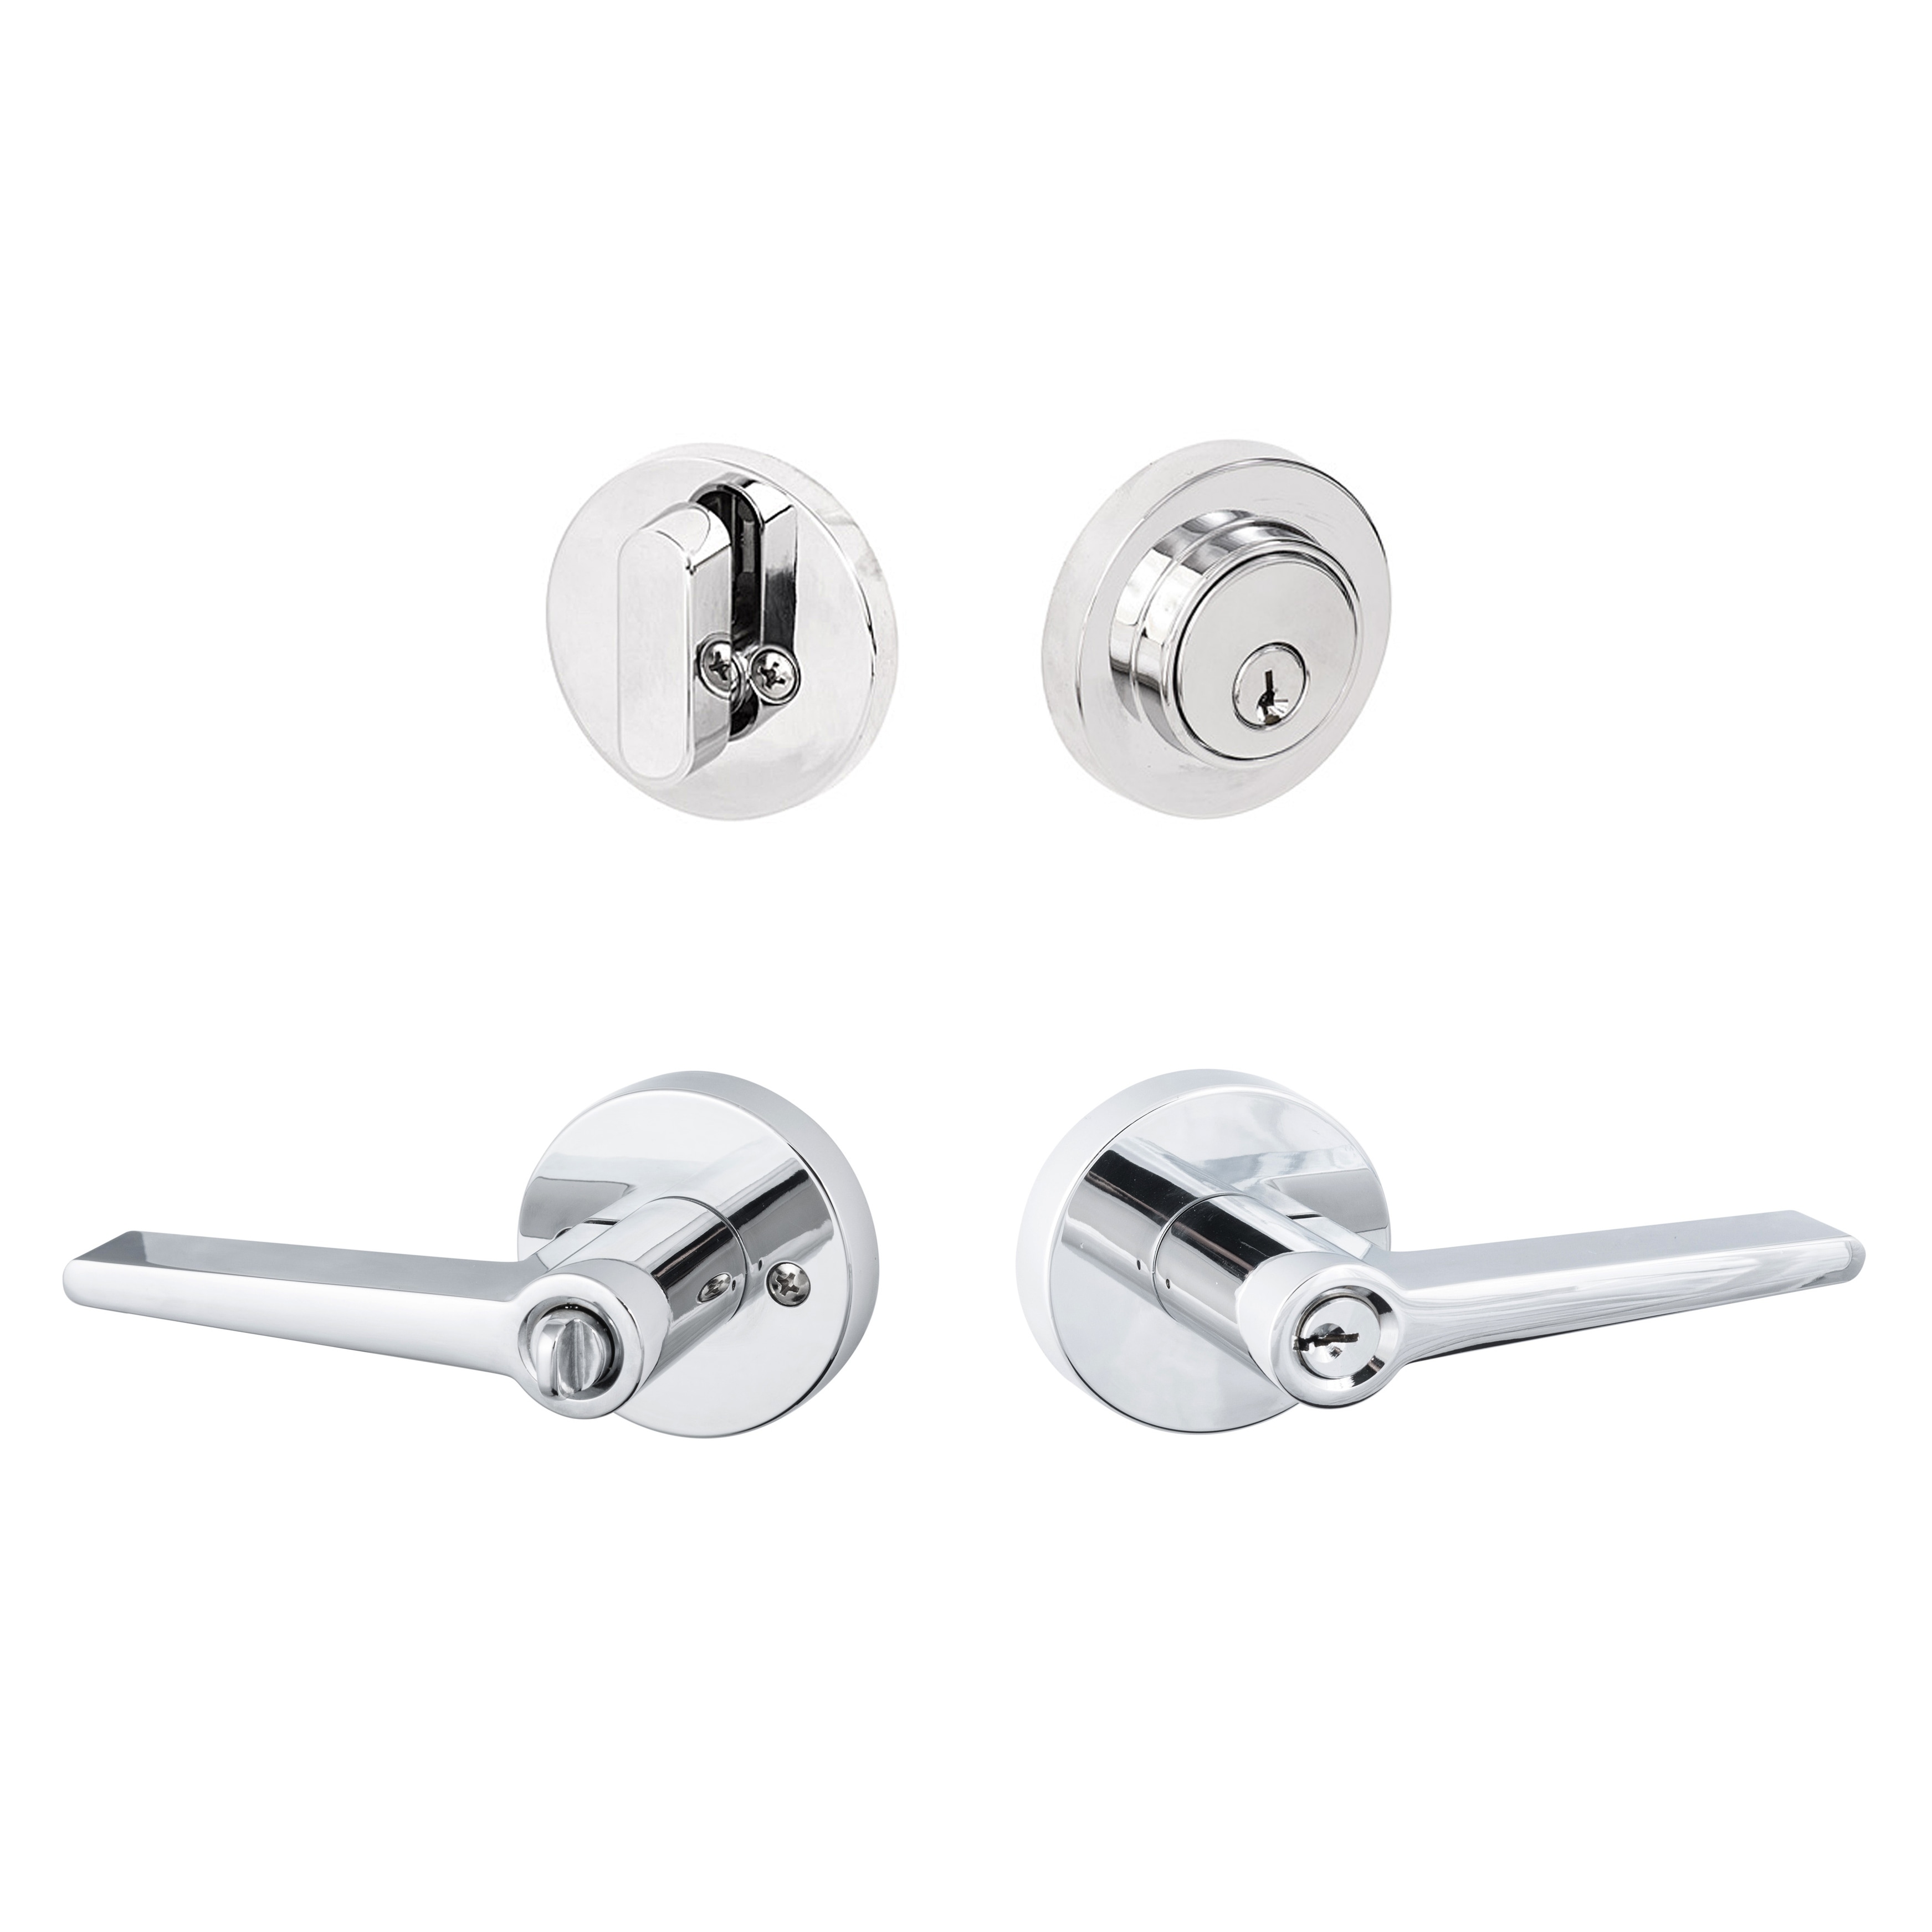 Sure-Loc Basel Round Modern Series Entry Level with Deadbolt